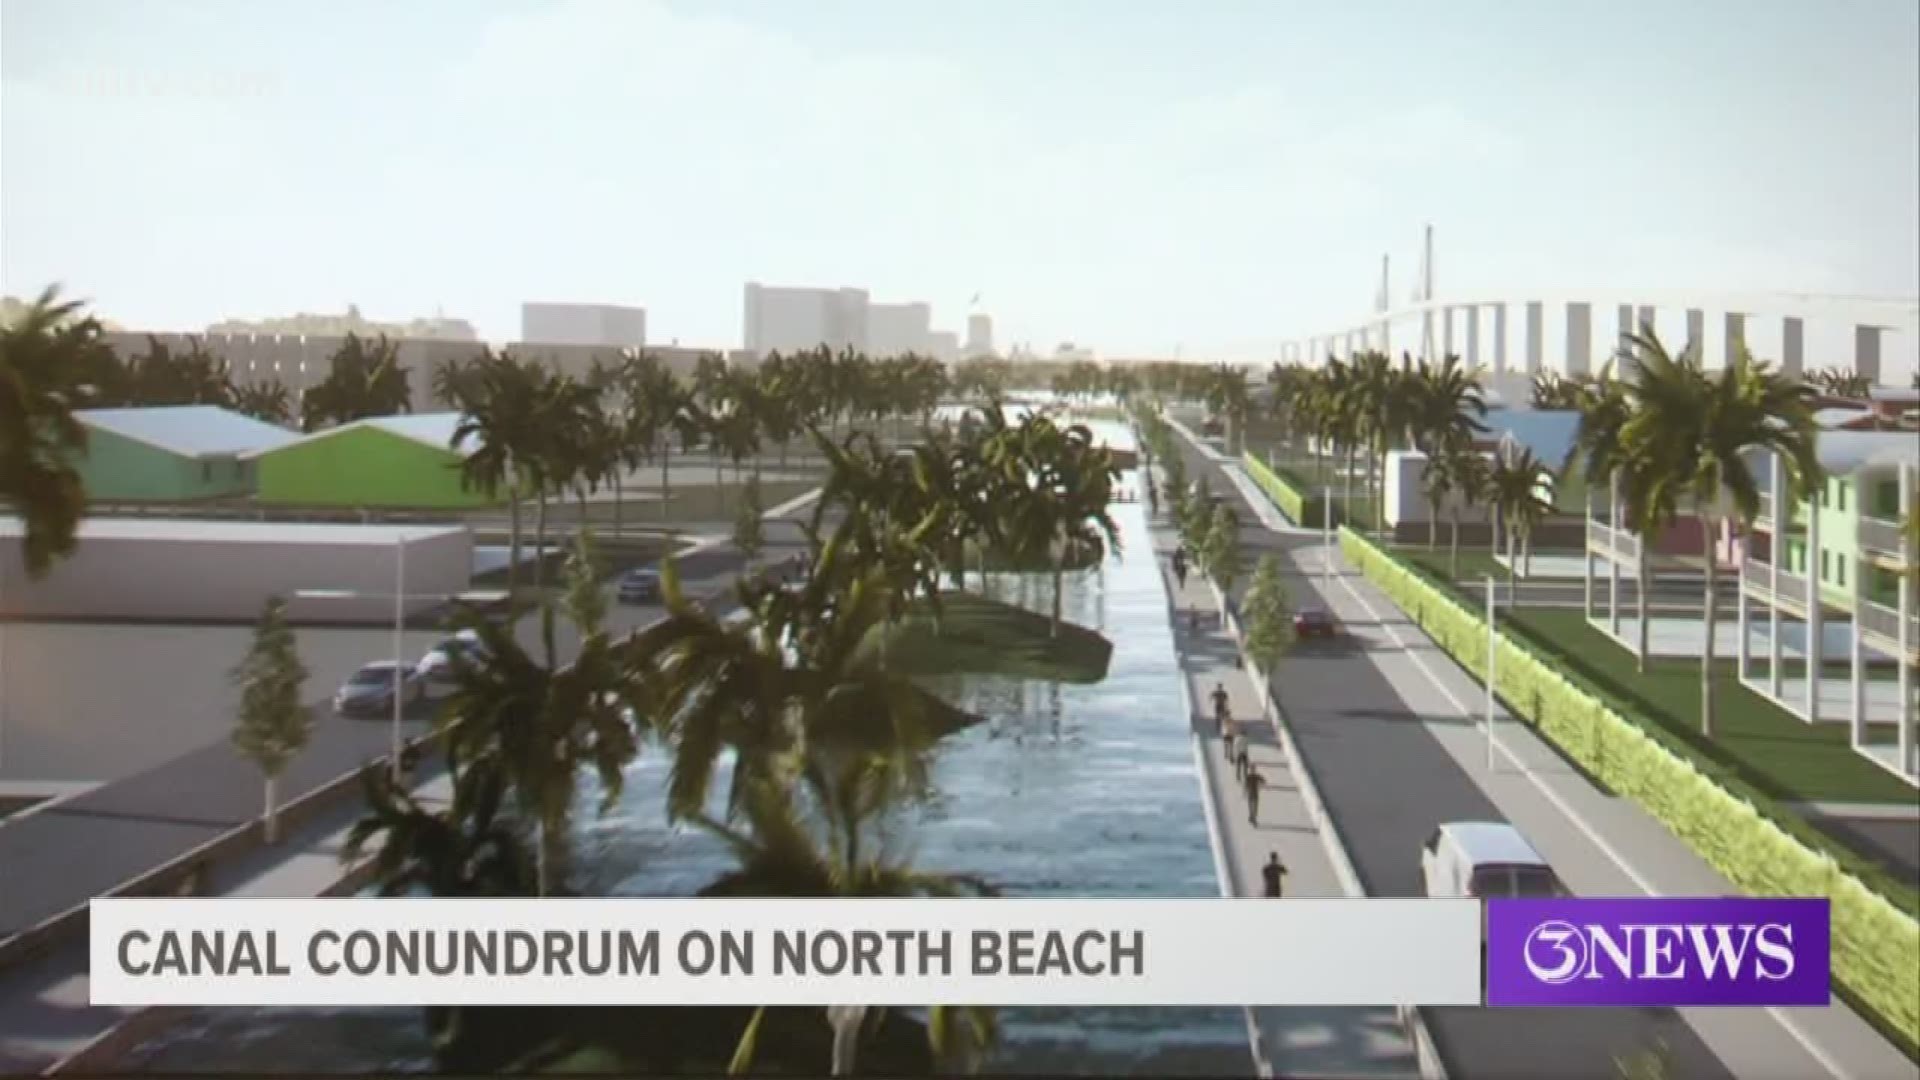 So what will that canal mean for those business owners who already call North Beach home?